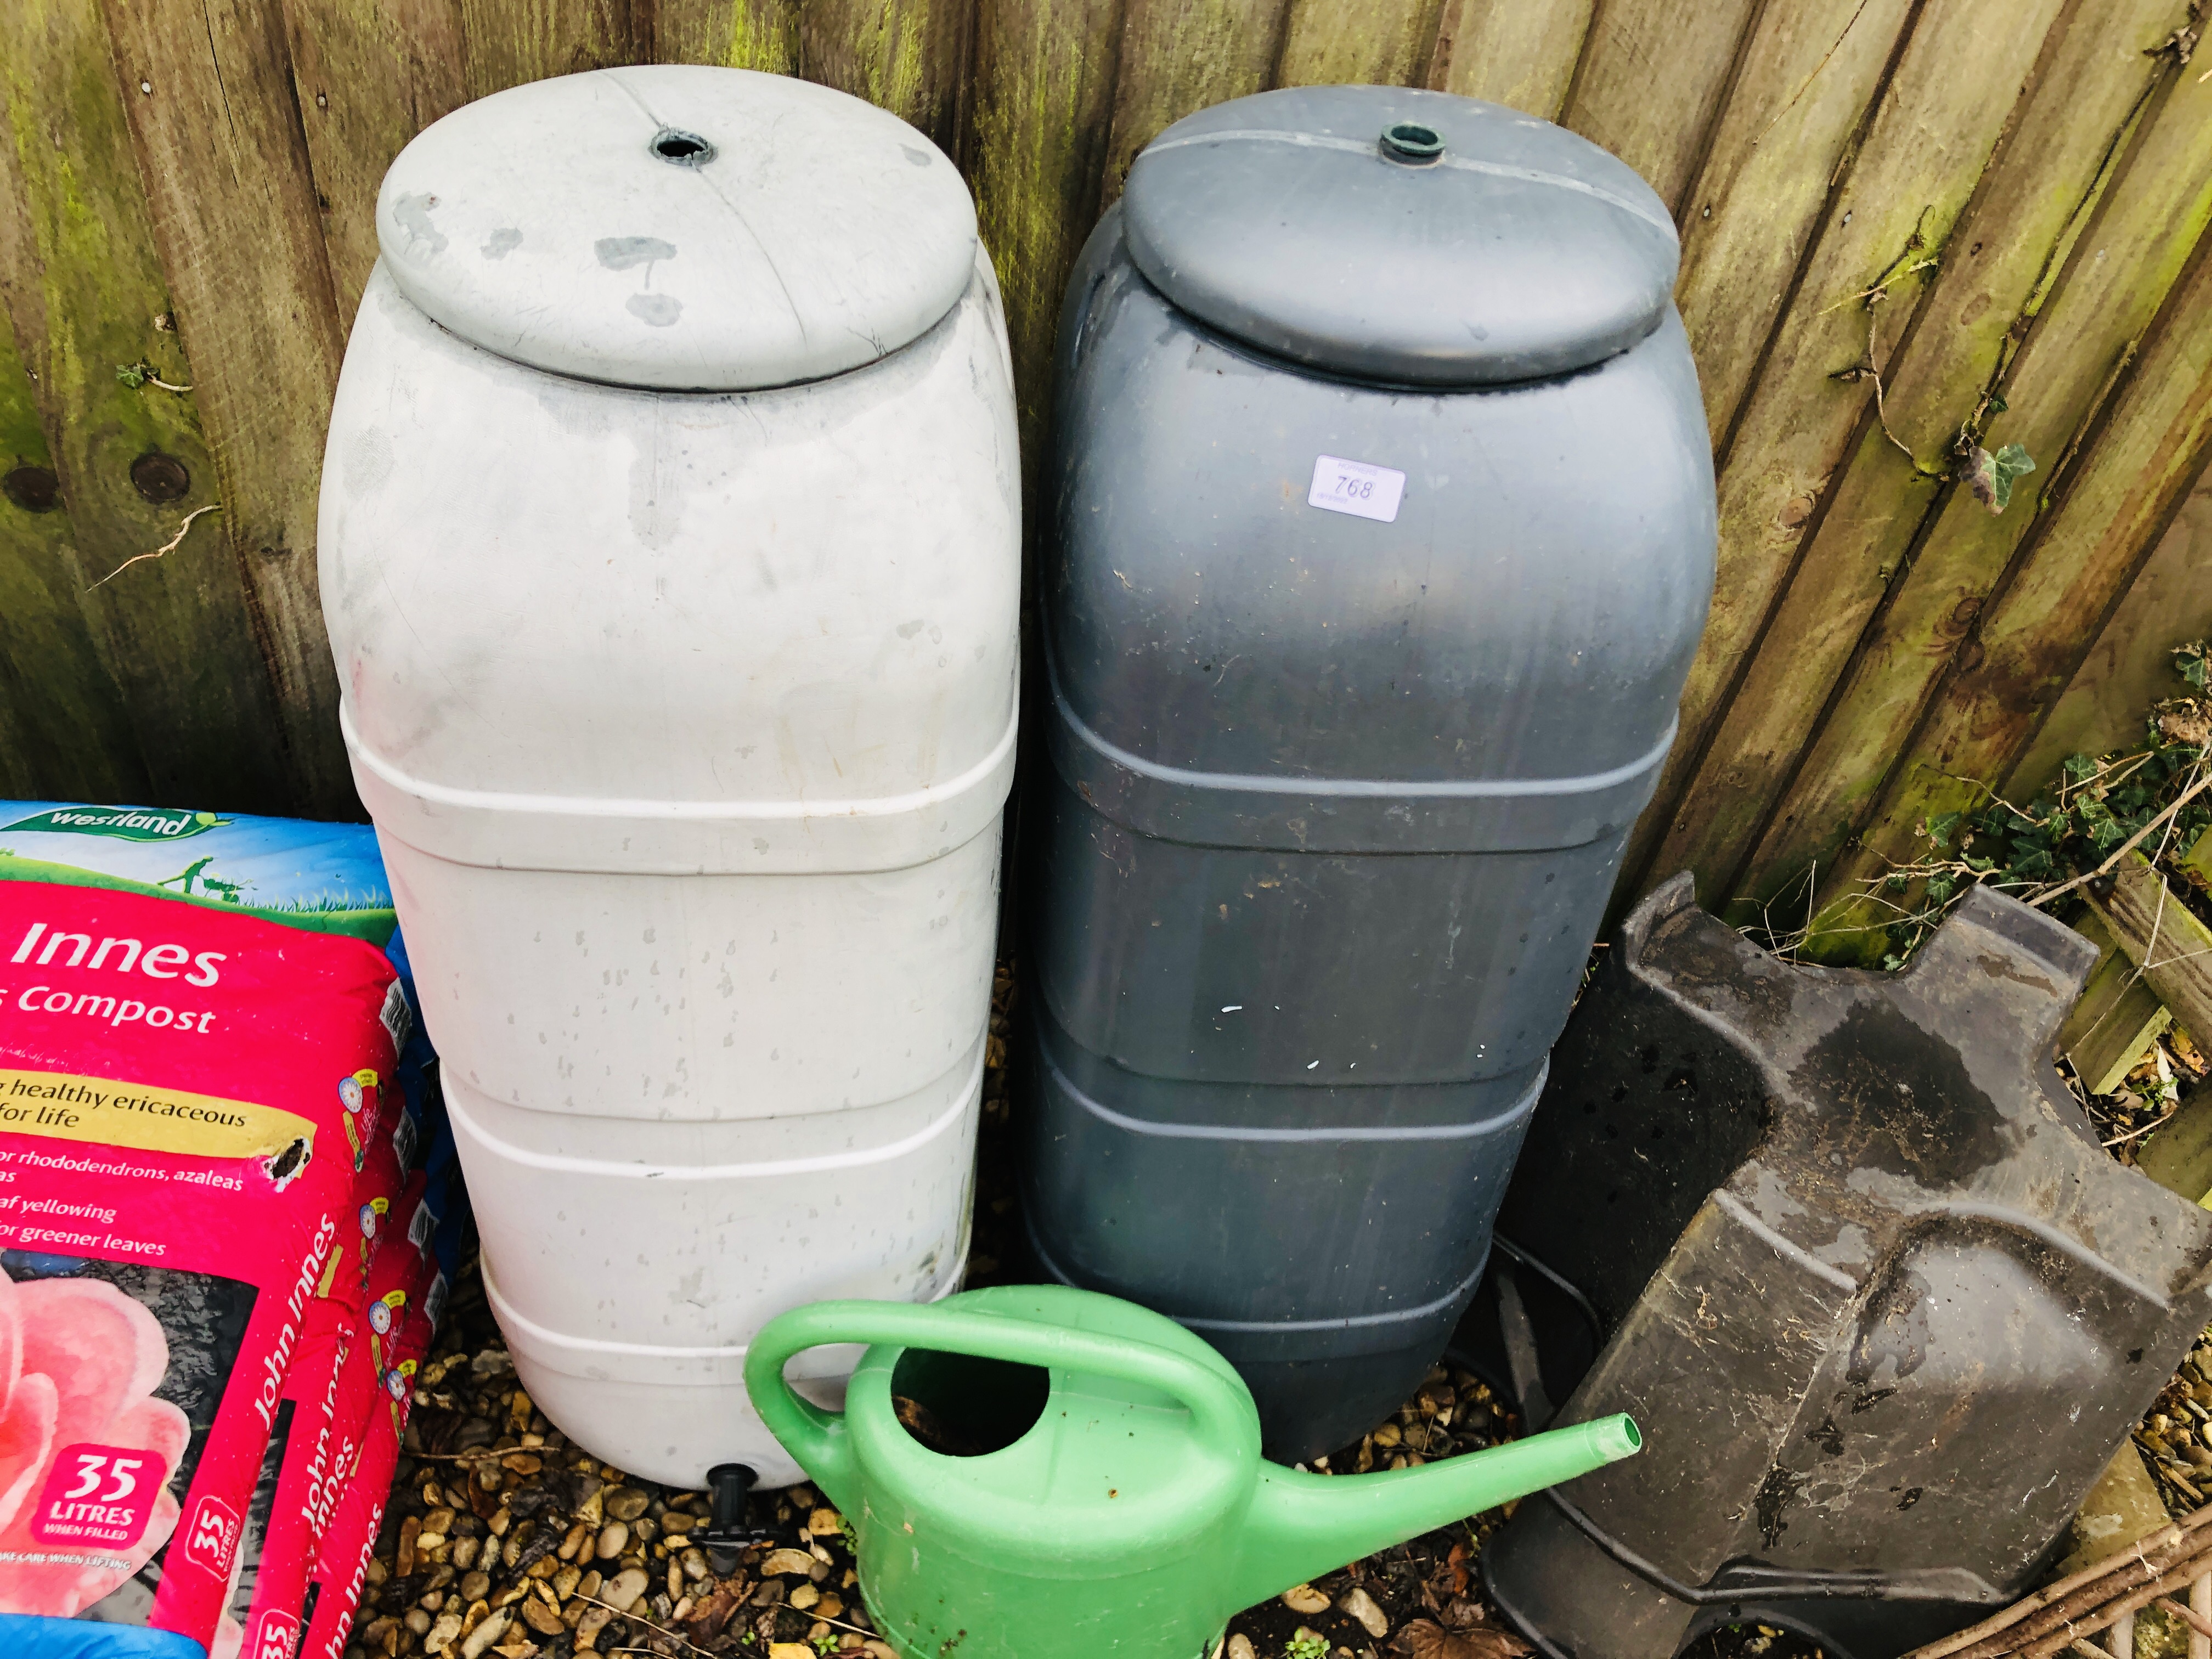 FOUR BAGS OF 35 LITRE JOHN INNES ERICACEOUS COMPOST, 2 X WATER BUTTS, PARASOL STAND, ETC. - Image 2 of 3